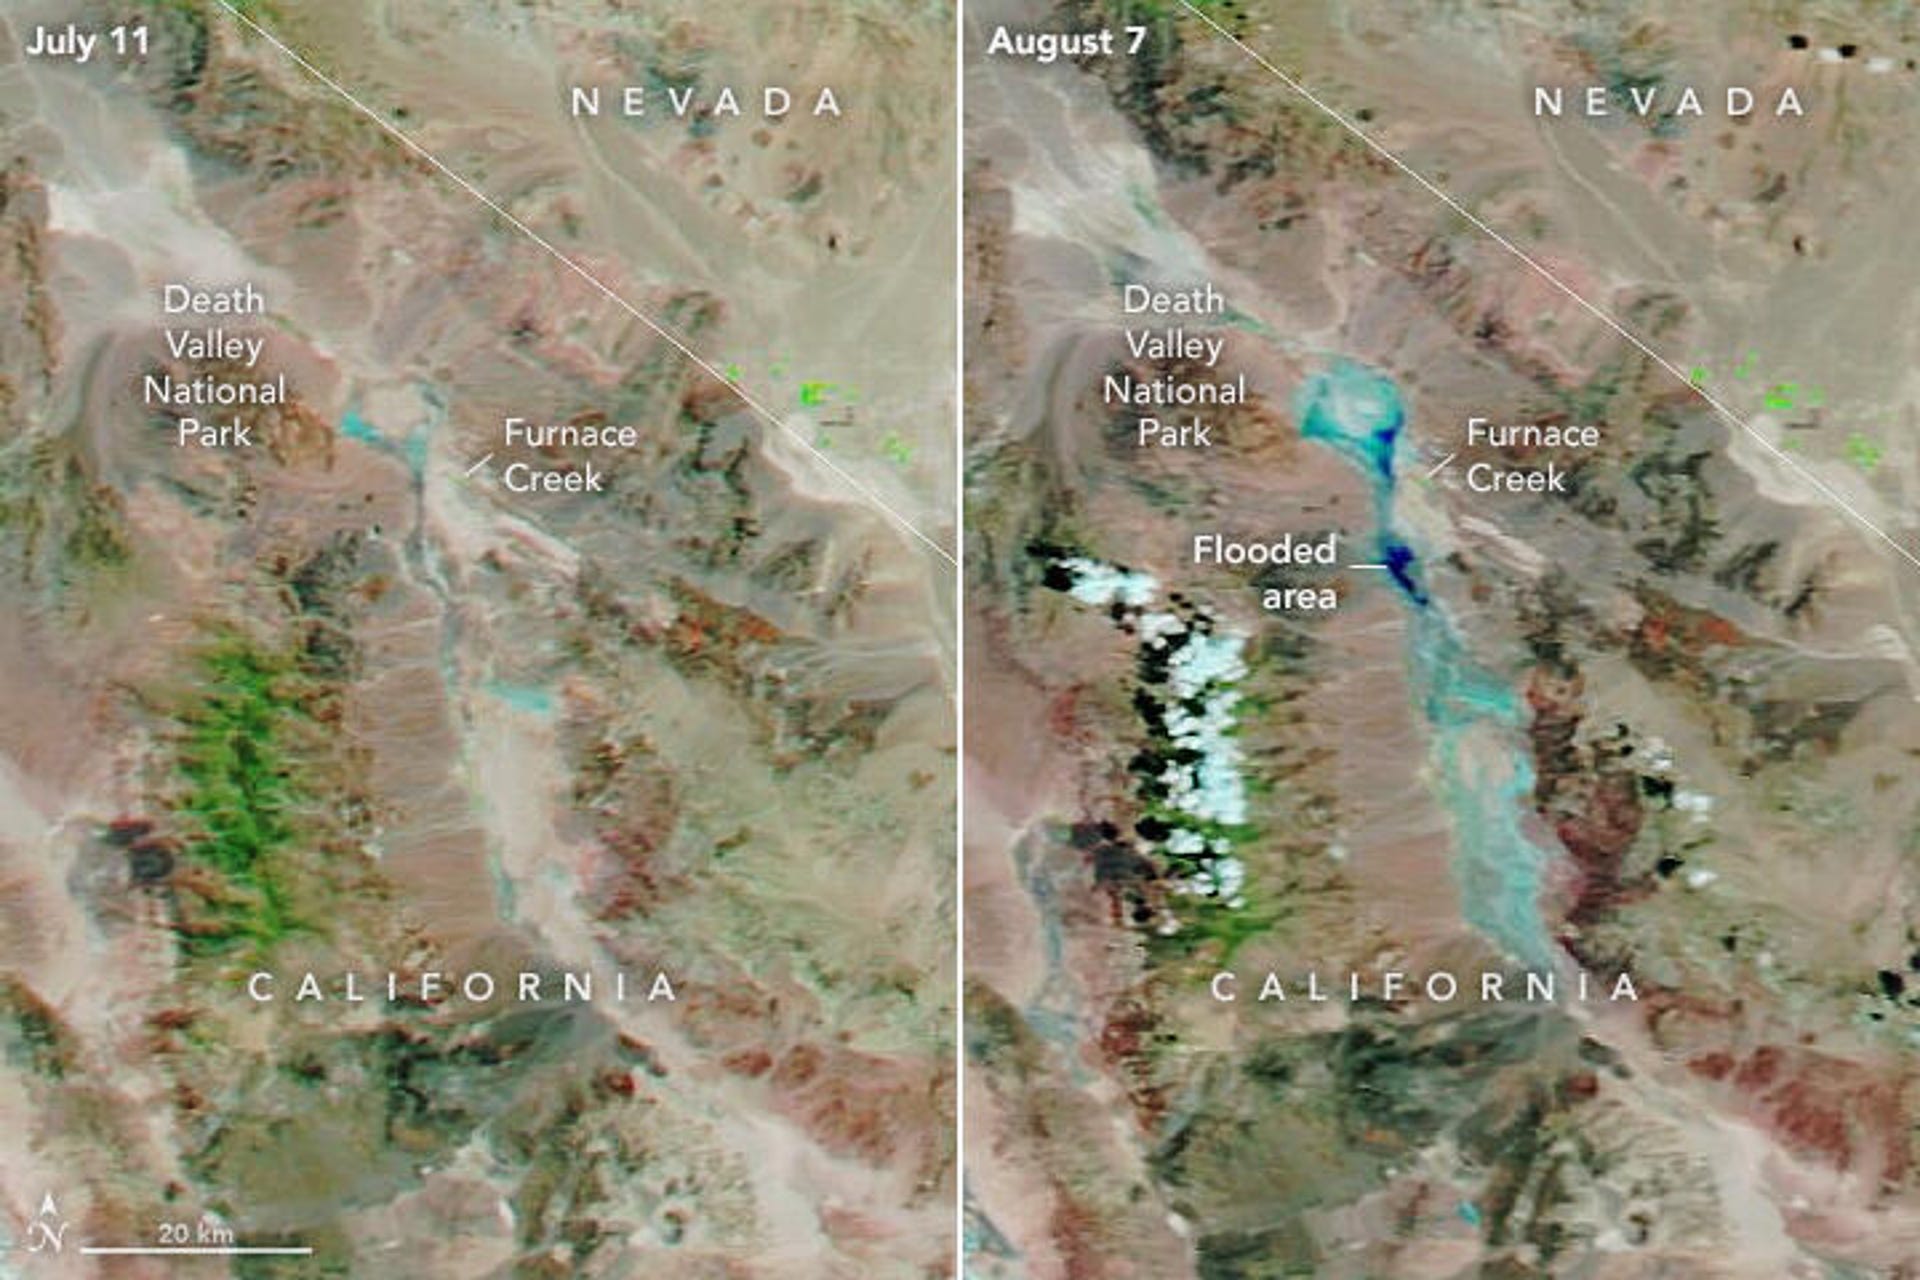 Two views of Furnace Creek area of Death Valley from July and August 2022 showing flooding.